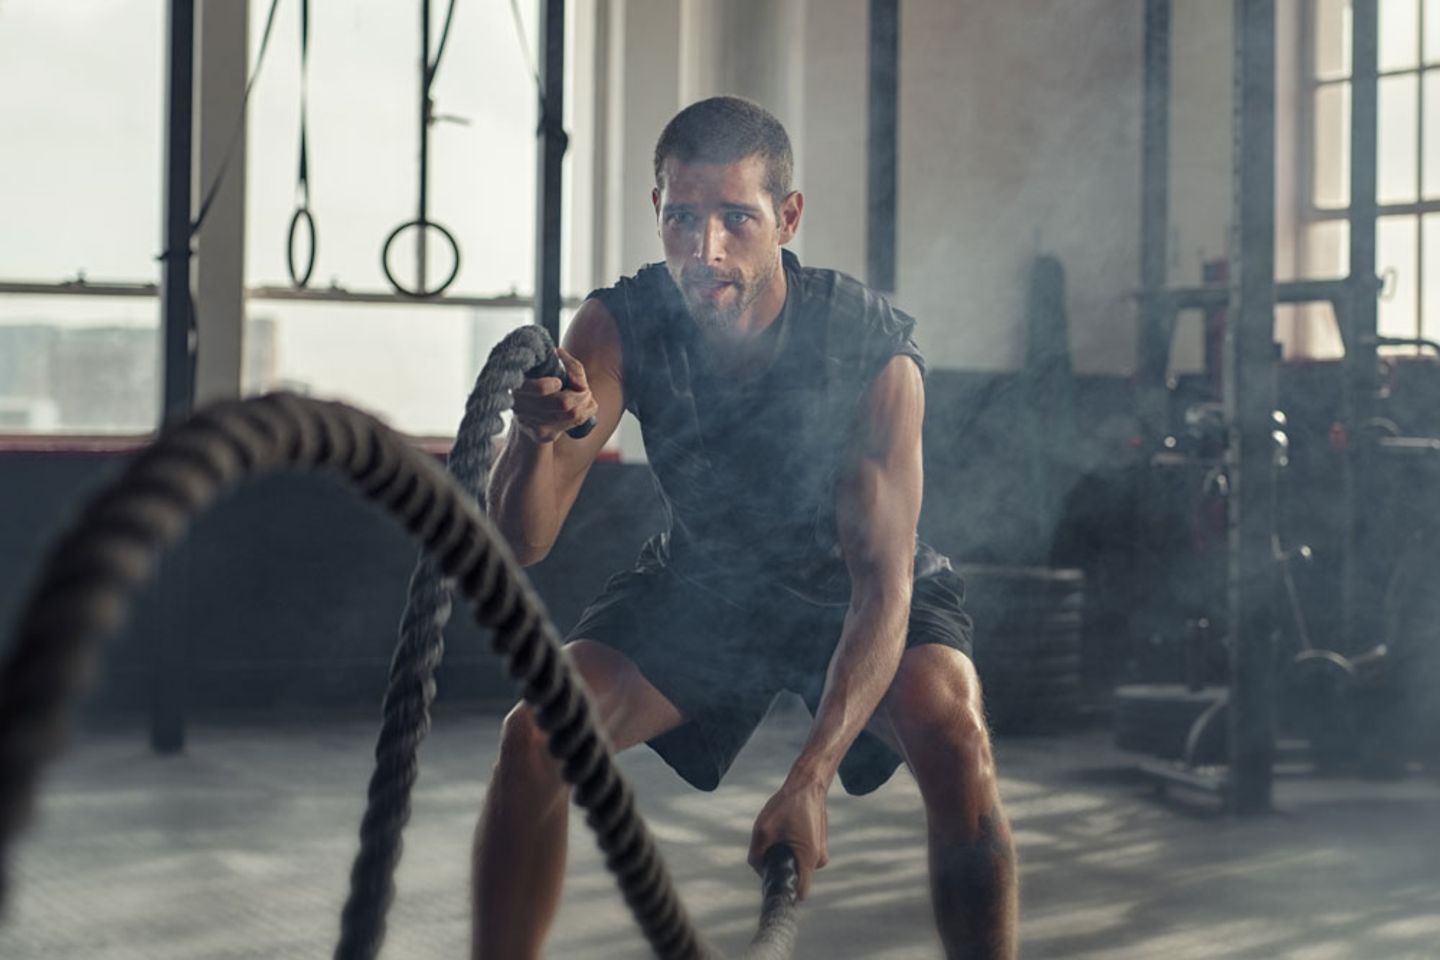 Man exercising using rope and showing resilience